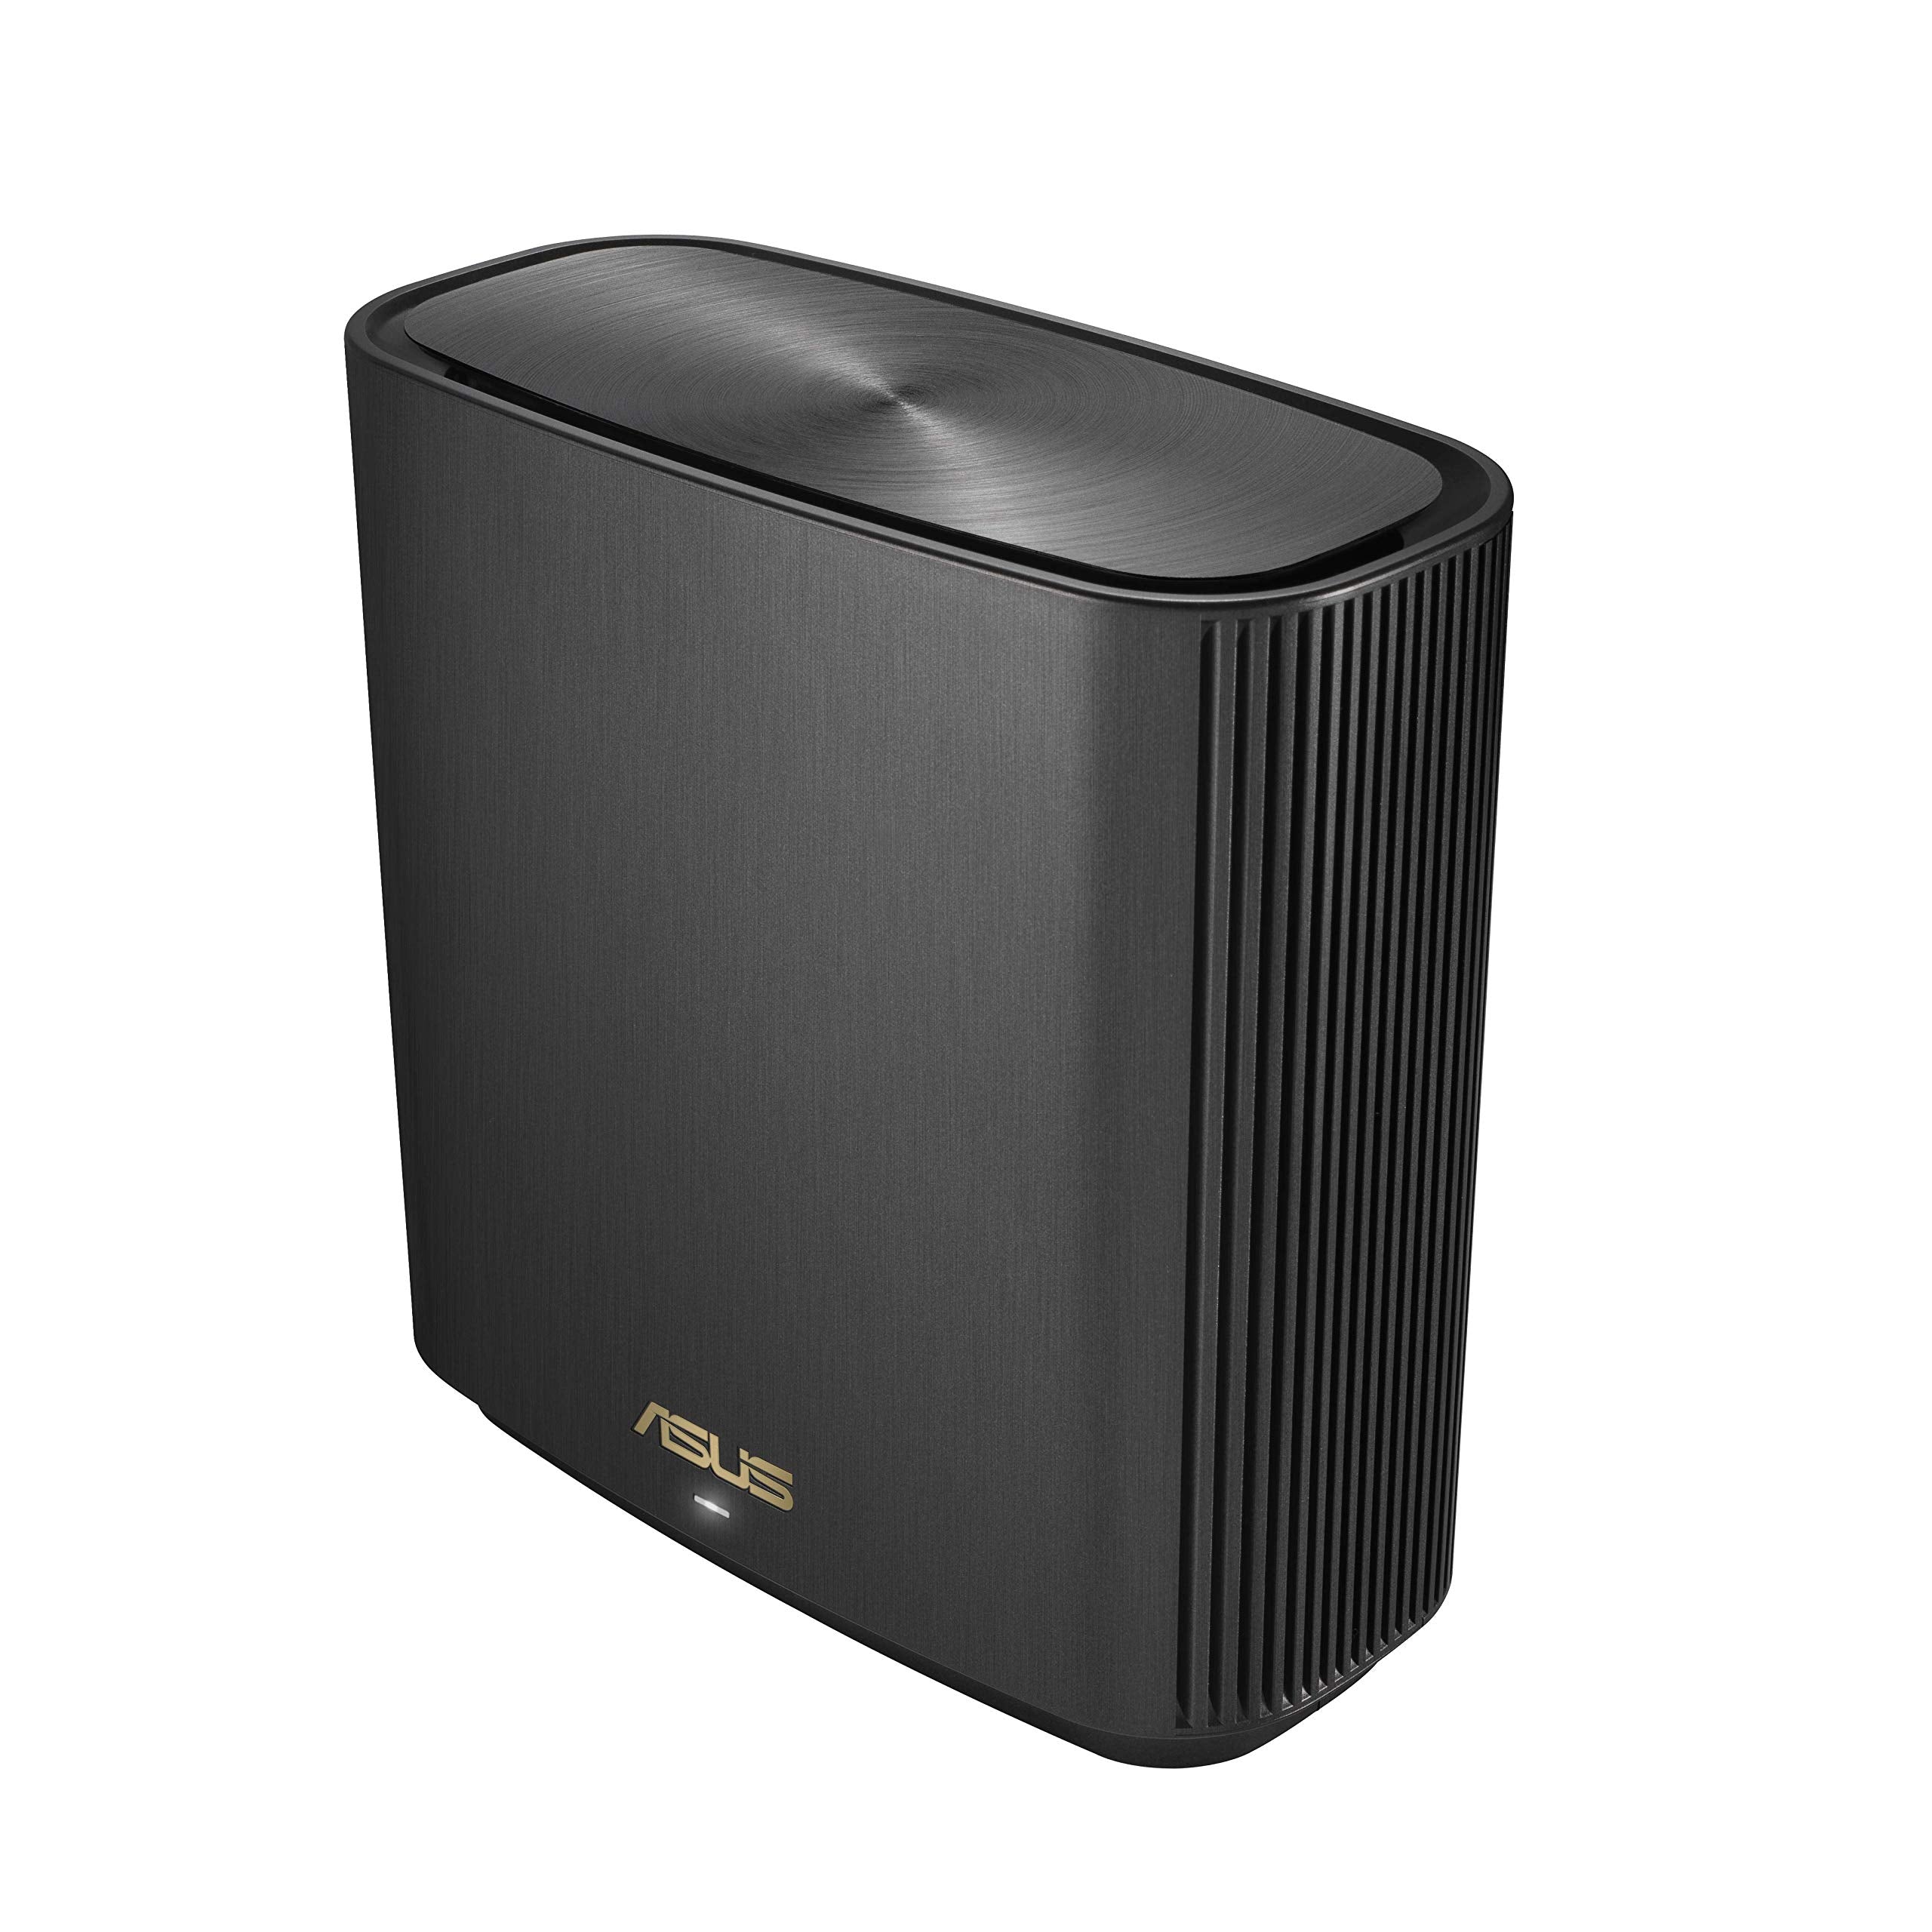 ASUS ZenWiFi AX Whole-Home Tri-Band Mesh WiFi 6 System(XT8), Coverage Up to 230 sq m or 2475 sq ft or 4+ Rooms, 6.6 Gbps WiFi, 3 SSIDs, Life-Time Free Network Security and Parental Controls, 2.5G Port